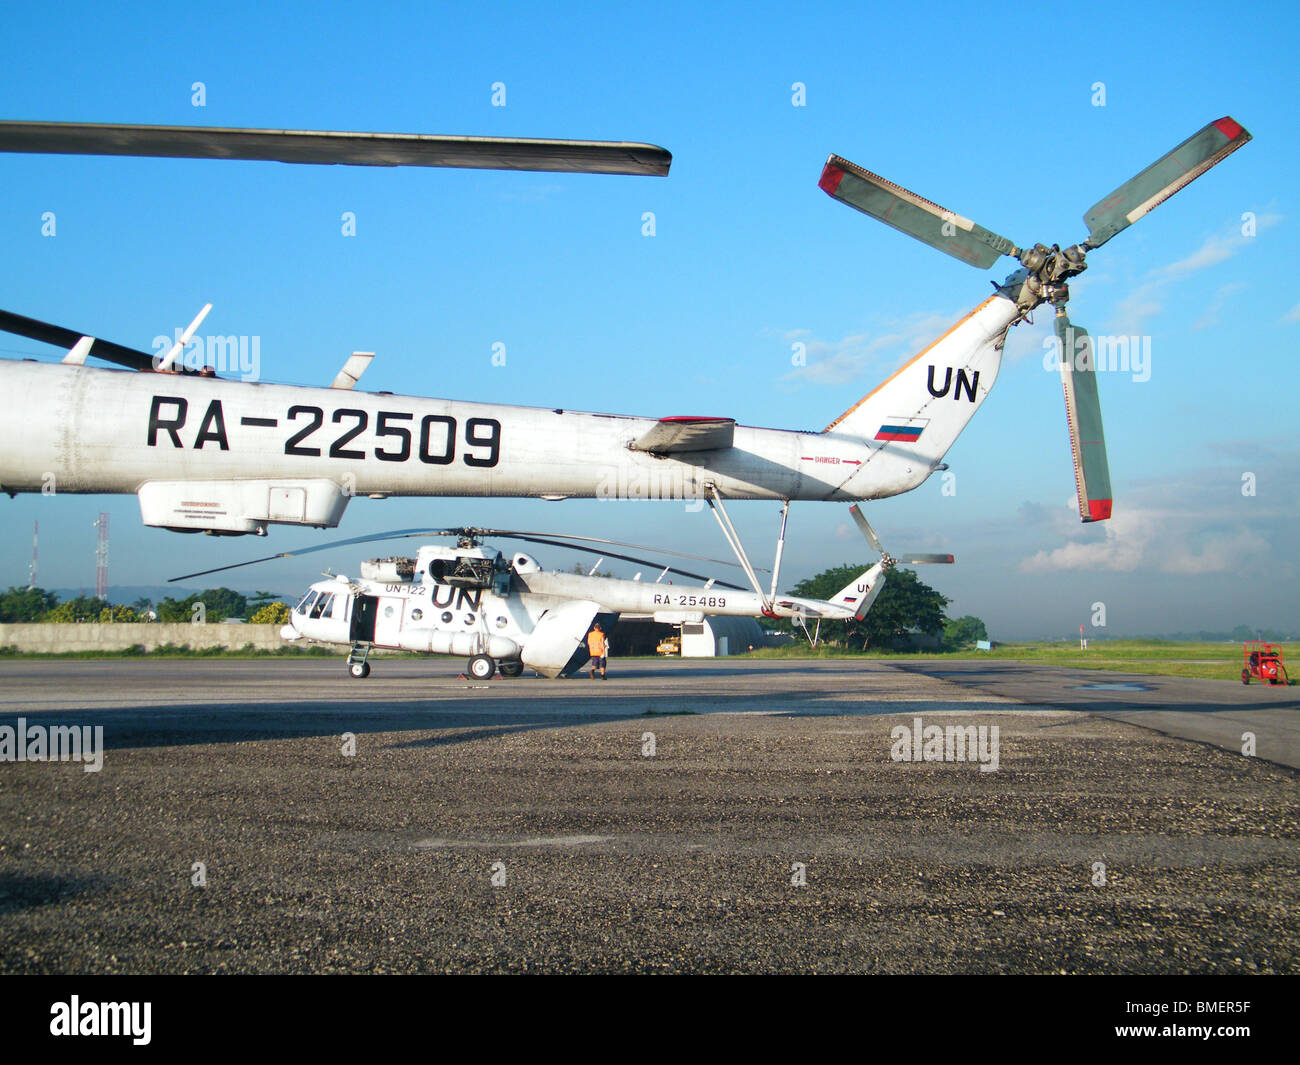 Ukranian-made United Nations helicopters on the tarmac at the Minustah logistics base in Port au Prince, Haiti Stock Photo